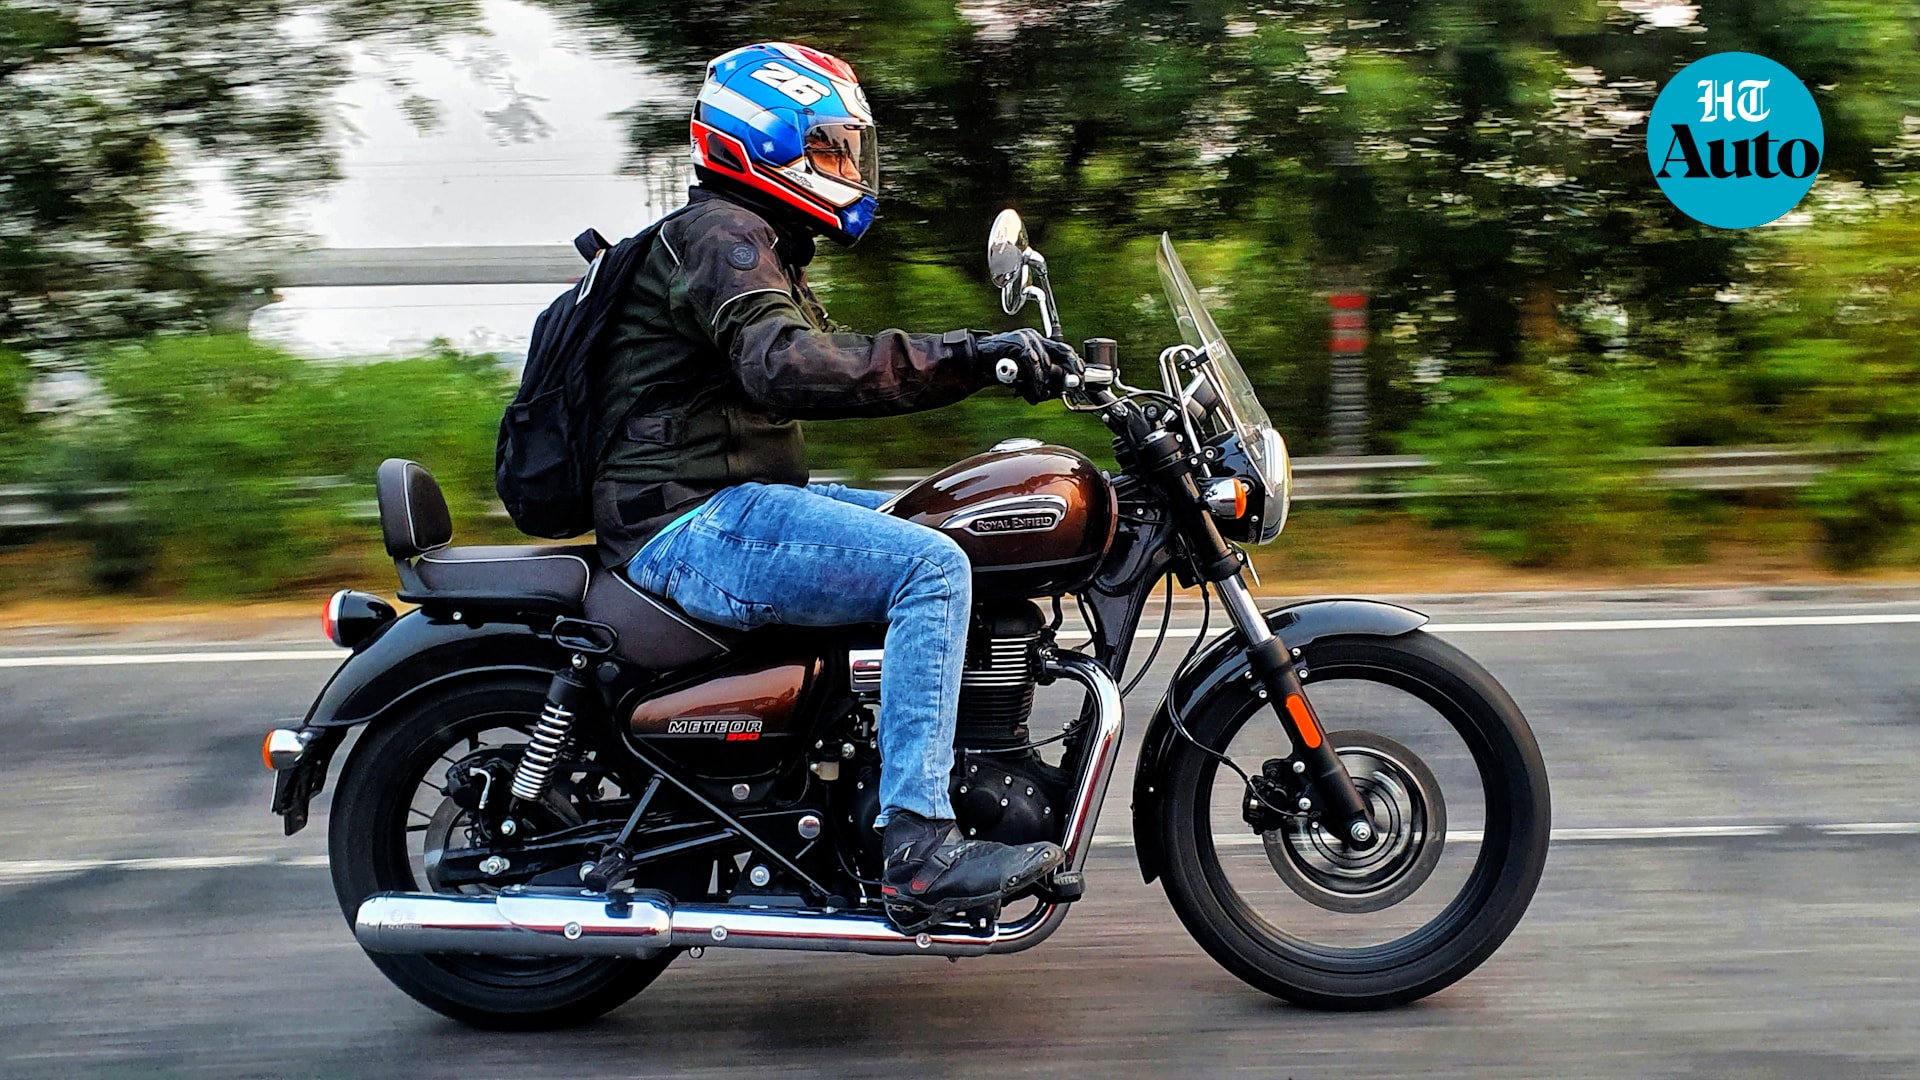 Meteor 350 feels surprisingly light and nimble for a 191 kg bike, especially on the roll. Image Courtesy: Sabyasachi Dasgupta